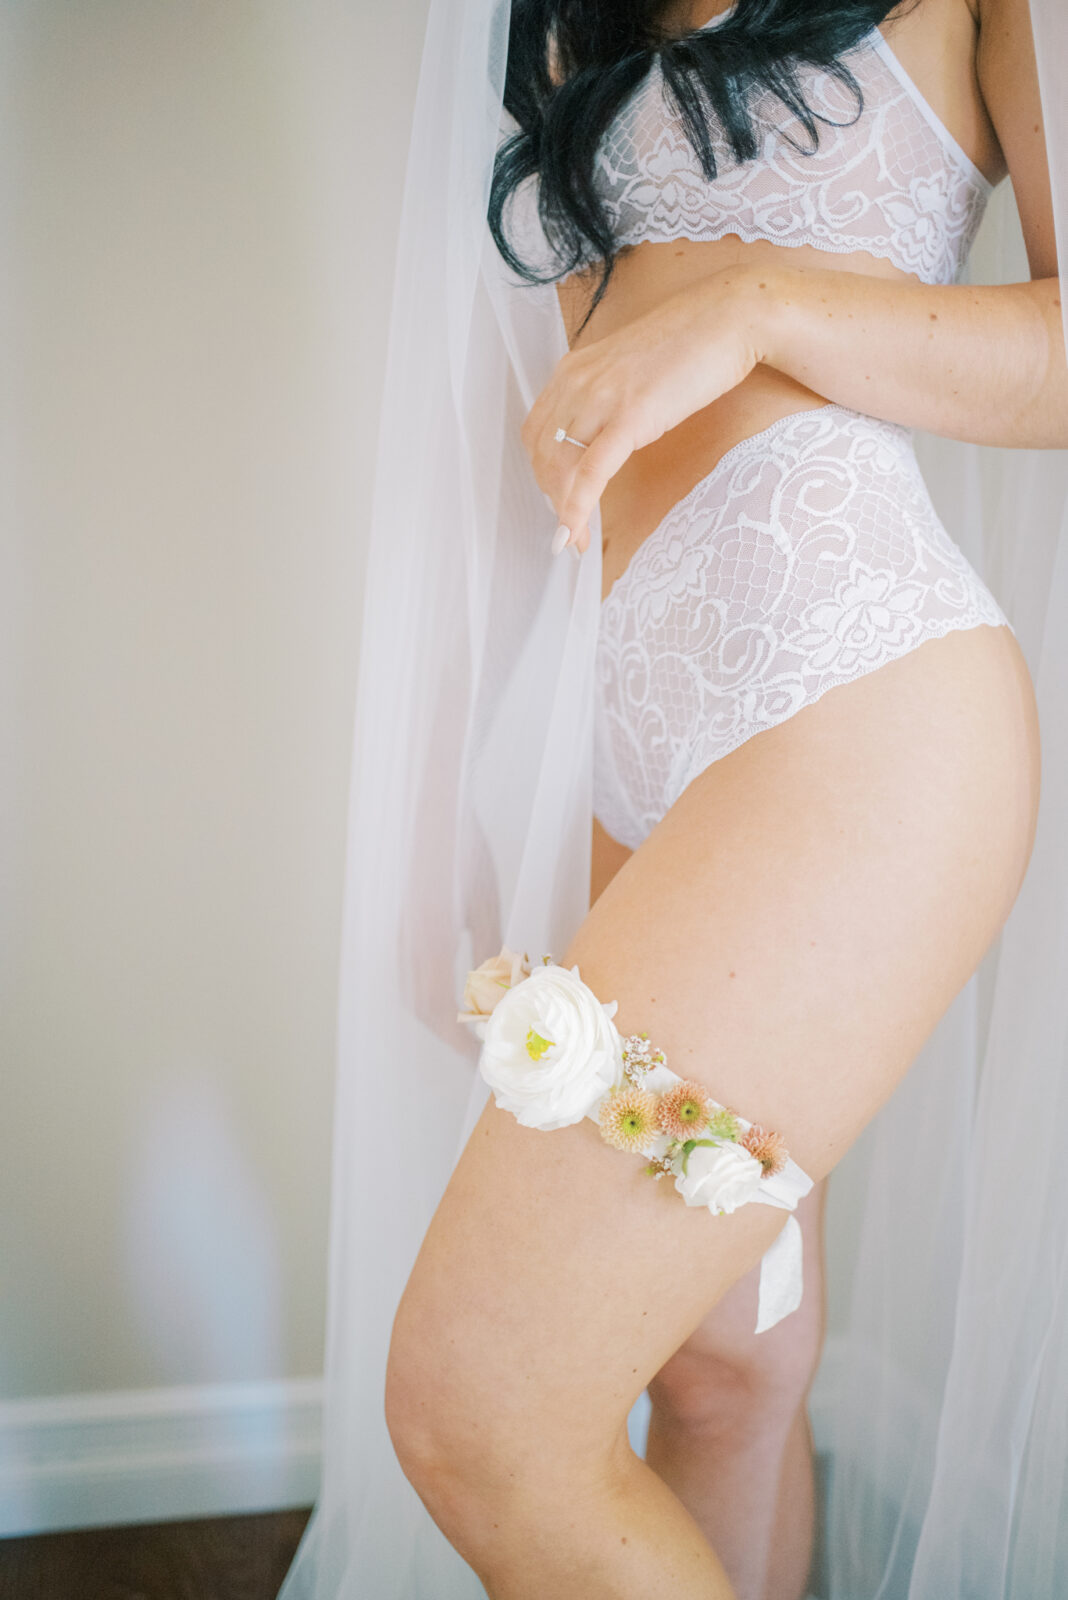 romantic bridal boudoir portraits with floral garter in a fall theme colour palette, white lace wedding day lingerie inspiration, bride wearing a long veil showing floral garter in intimate photoshoot